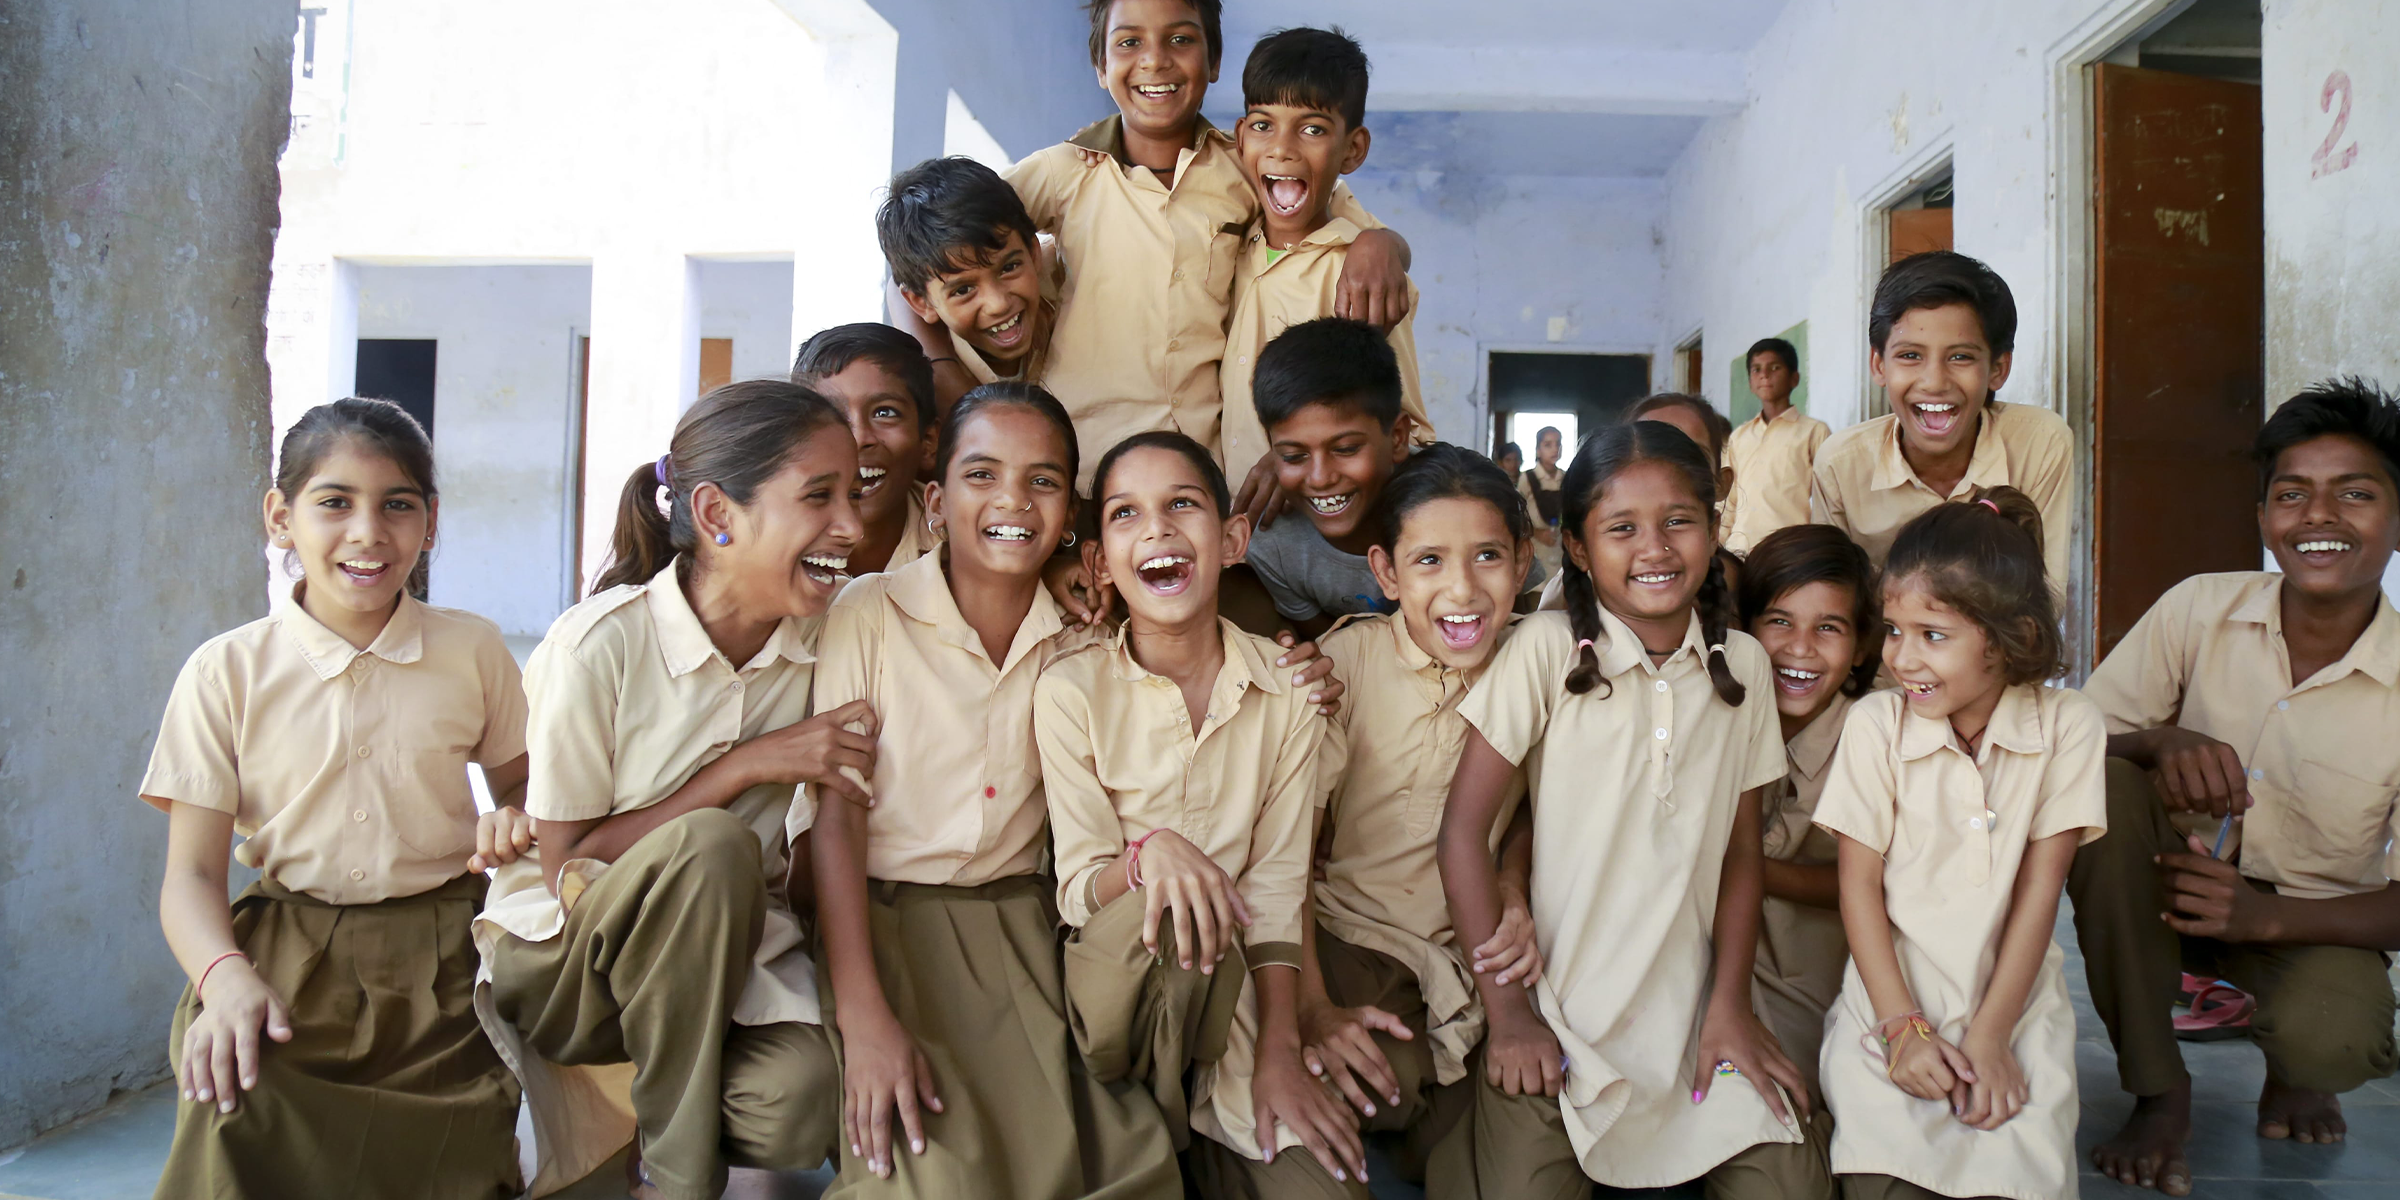 Group of children in India wearing school uniforms smiling and laughing. Text overlay states "Giving Back. 1 Item Purchased = 1 Meal Donated."